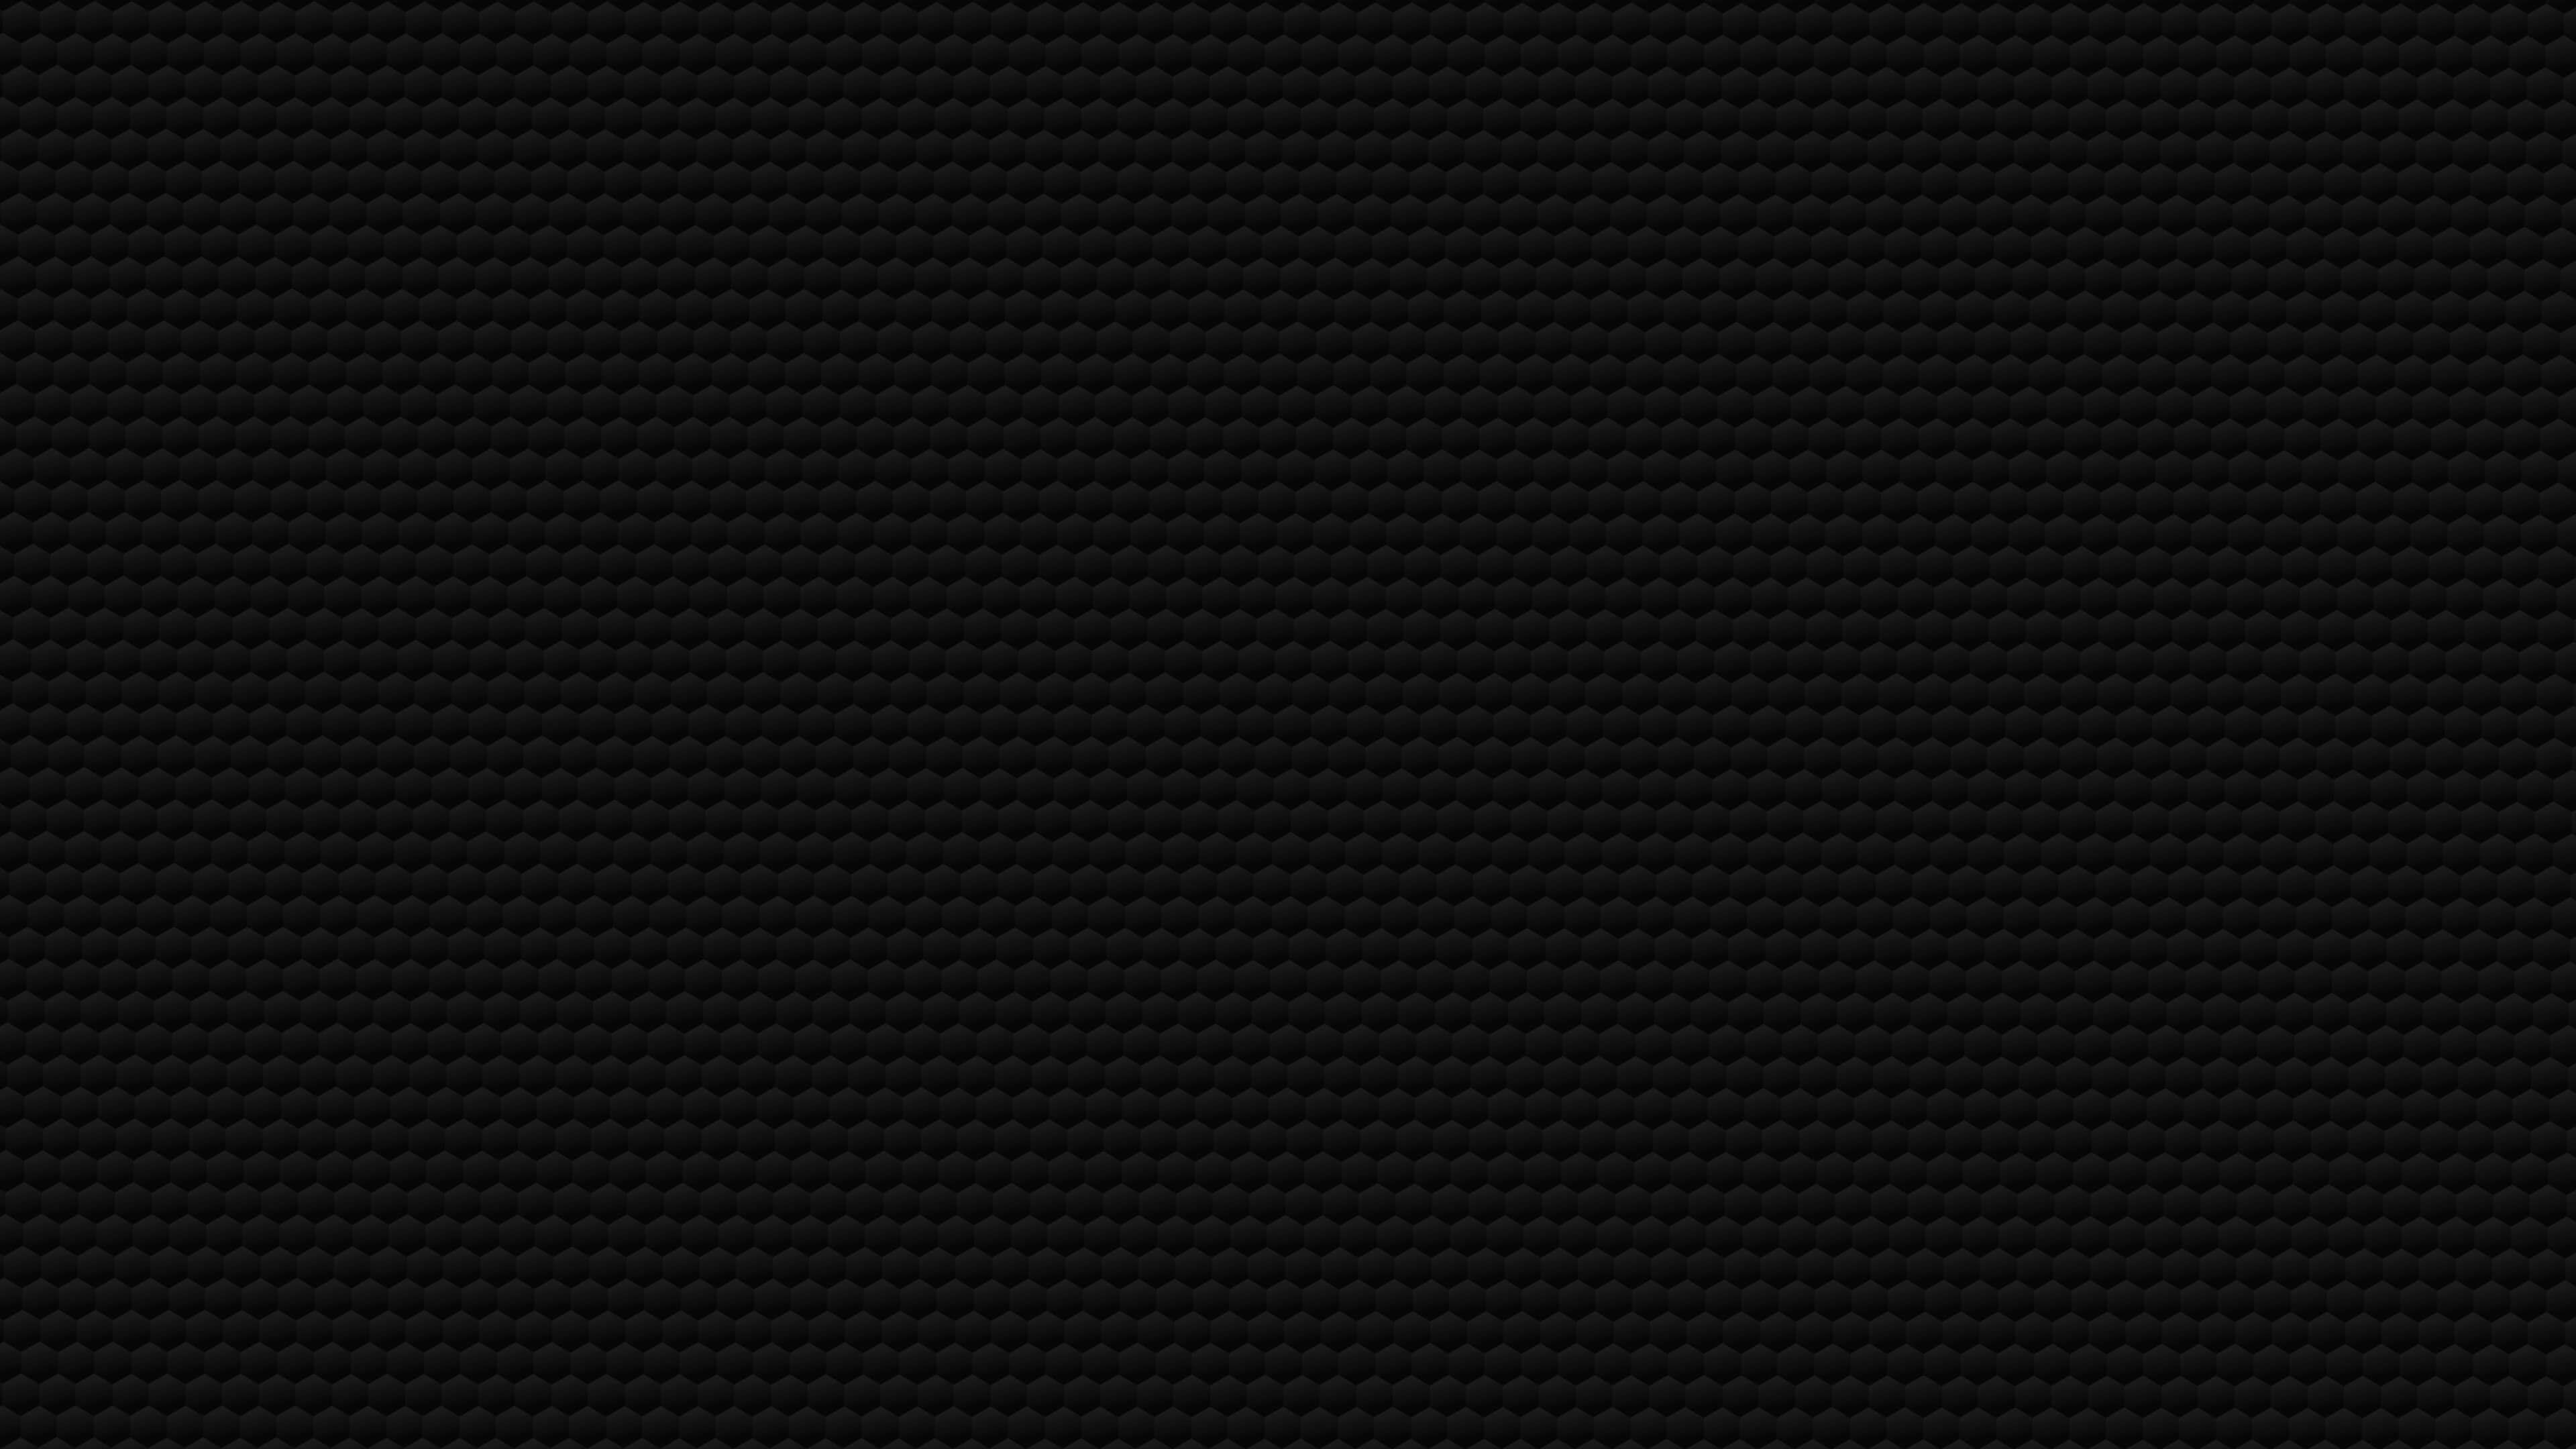 Download A Black Background With A Pixelated Image Of A Square Wallpaper   Wallpaperscom